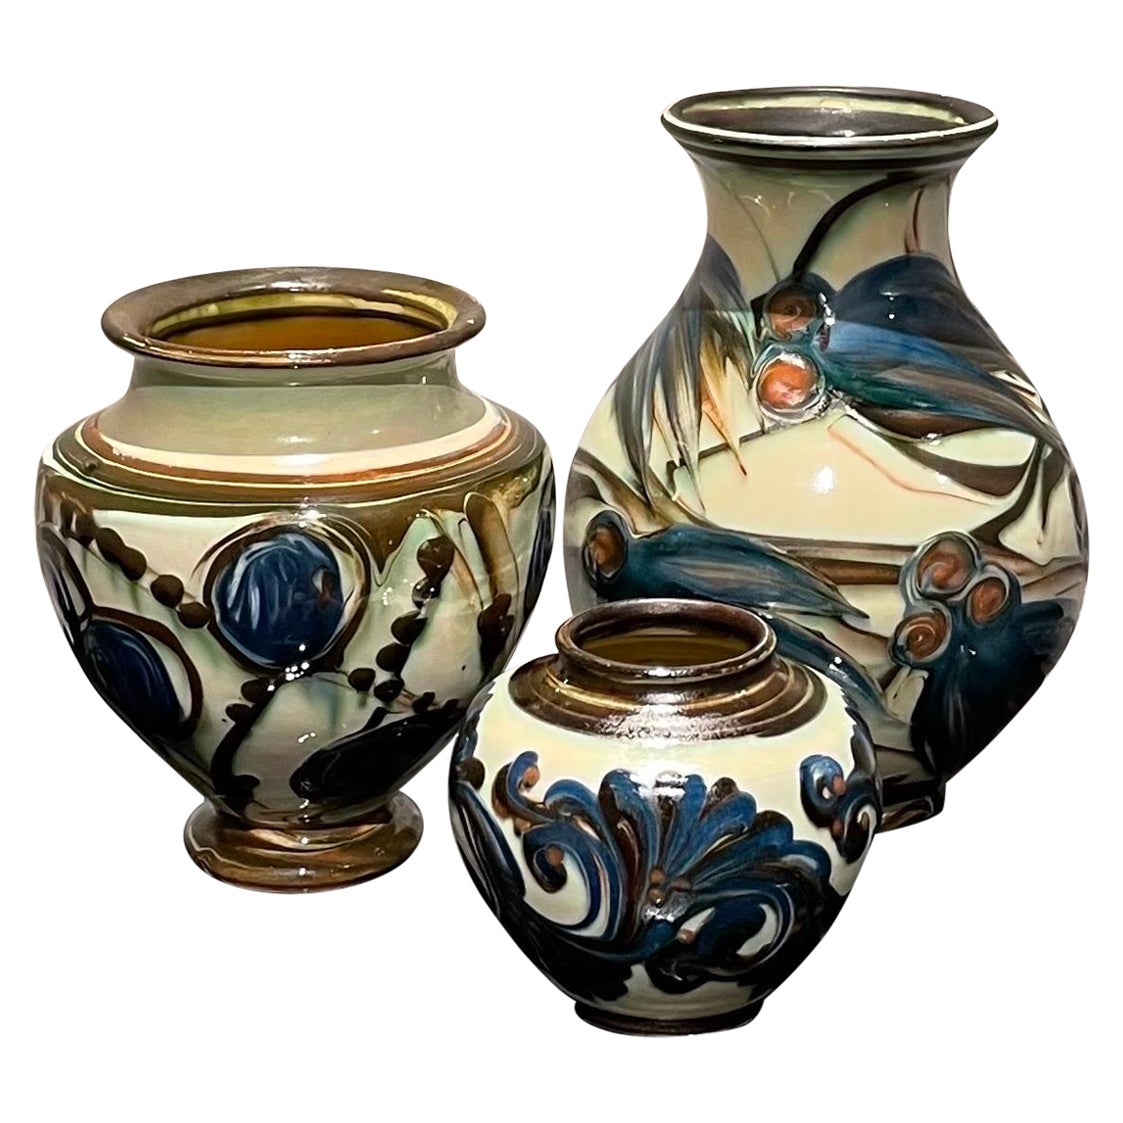 Danish Herman Kähler Ceramic Vase Collection from the 1920s in a Set of Three For Sale